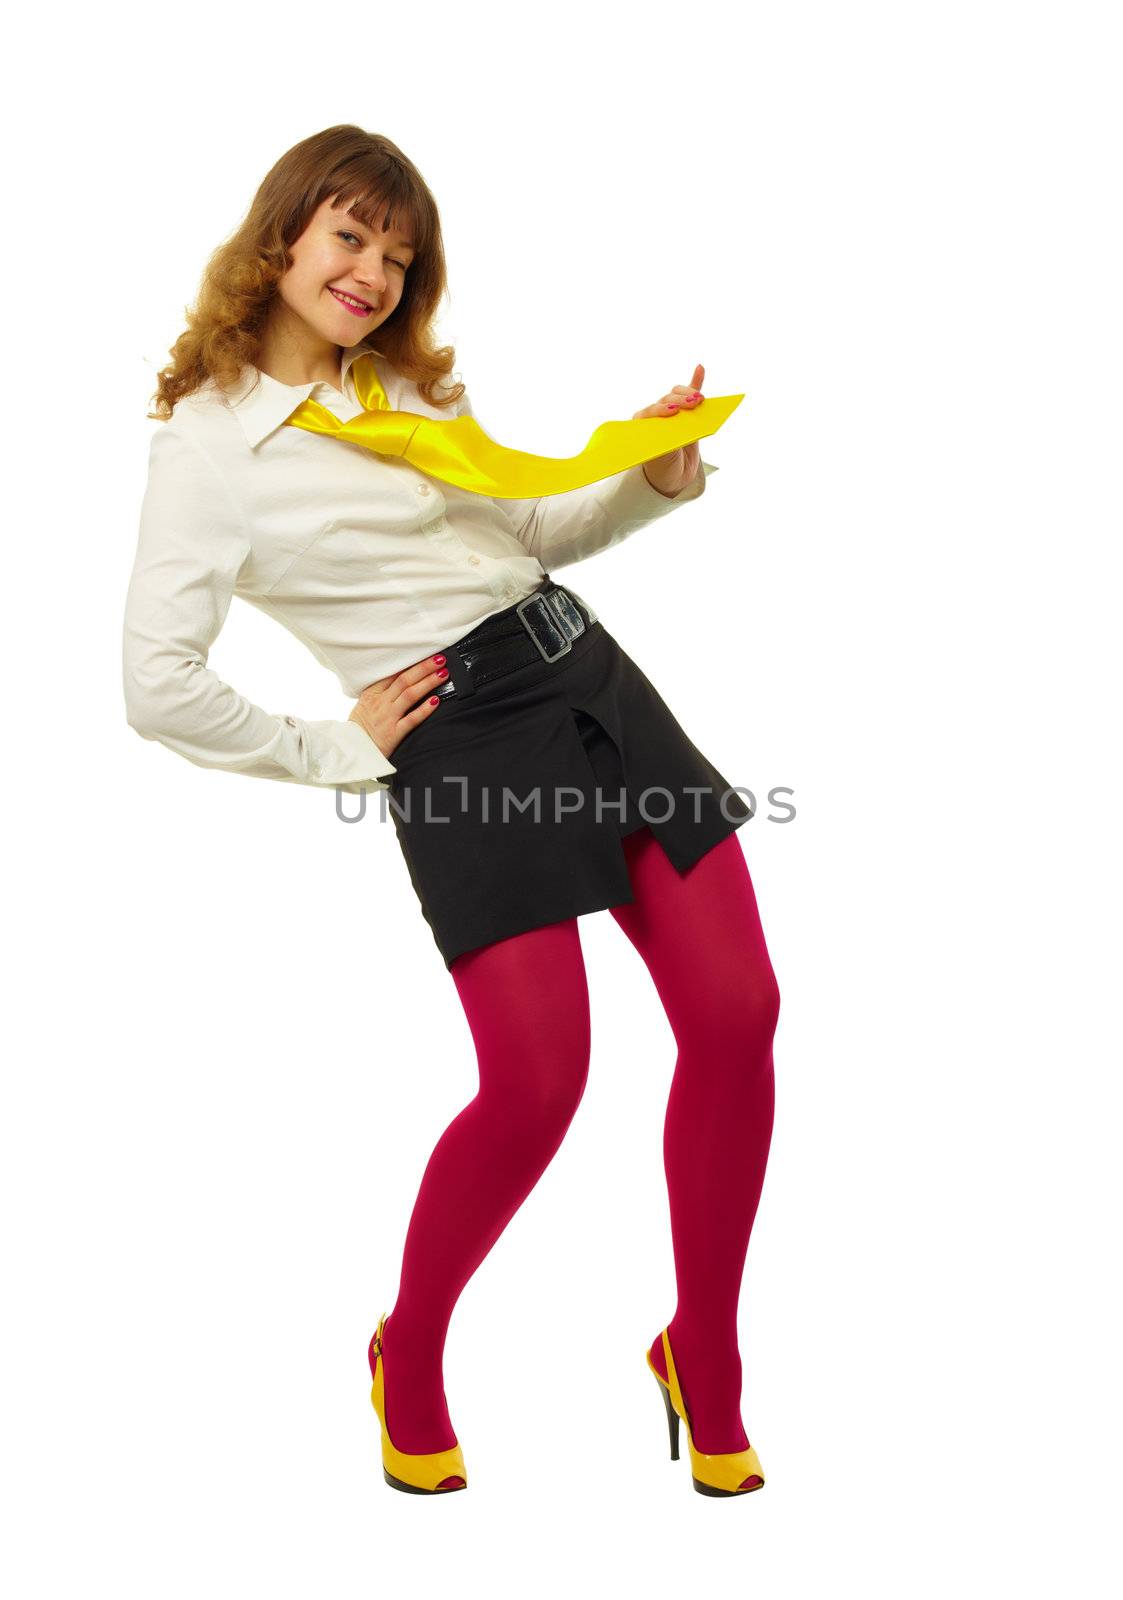 happy girl in a bright colored clothing on a white background
